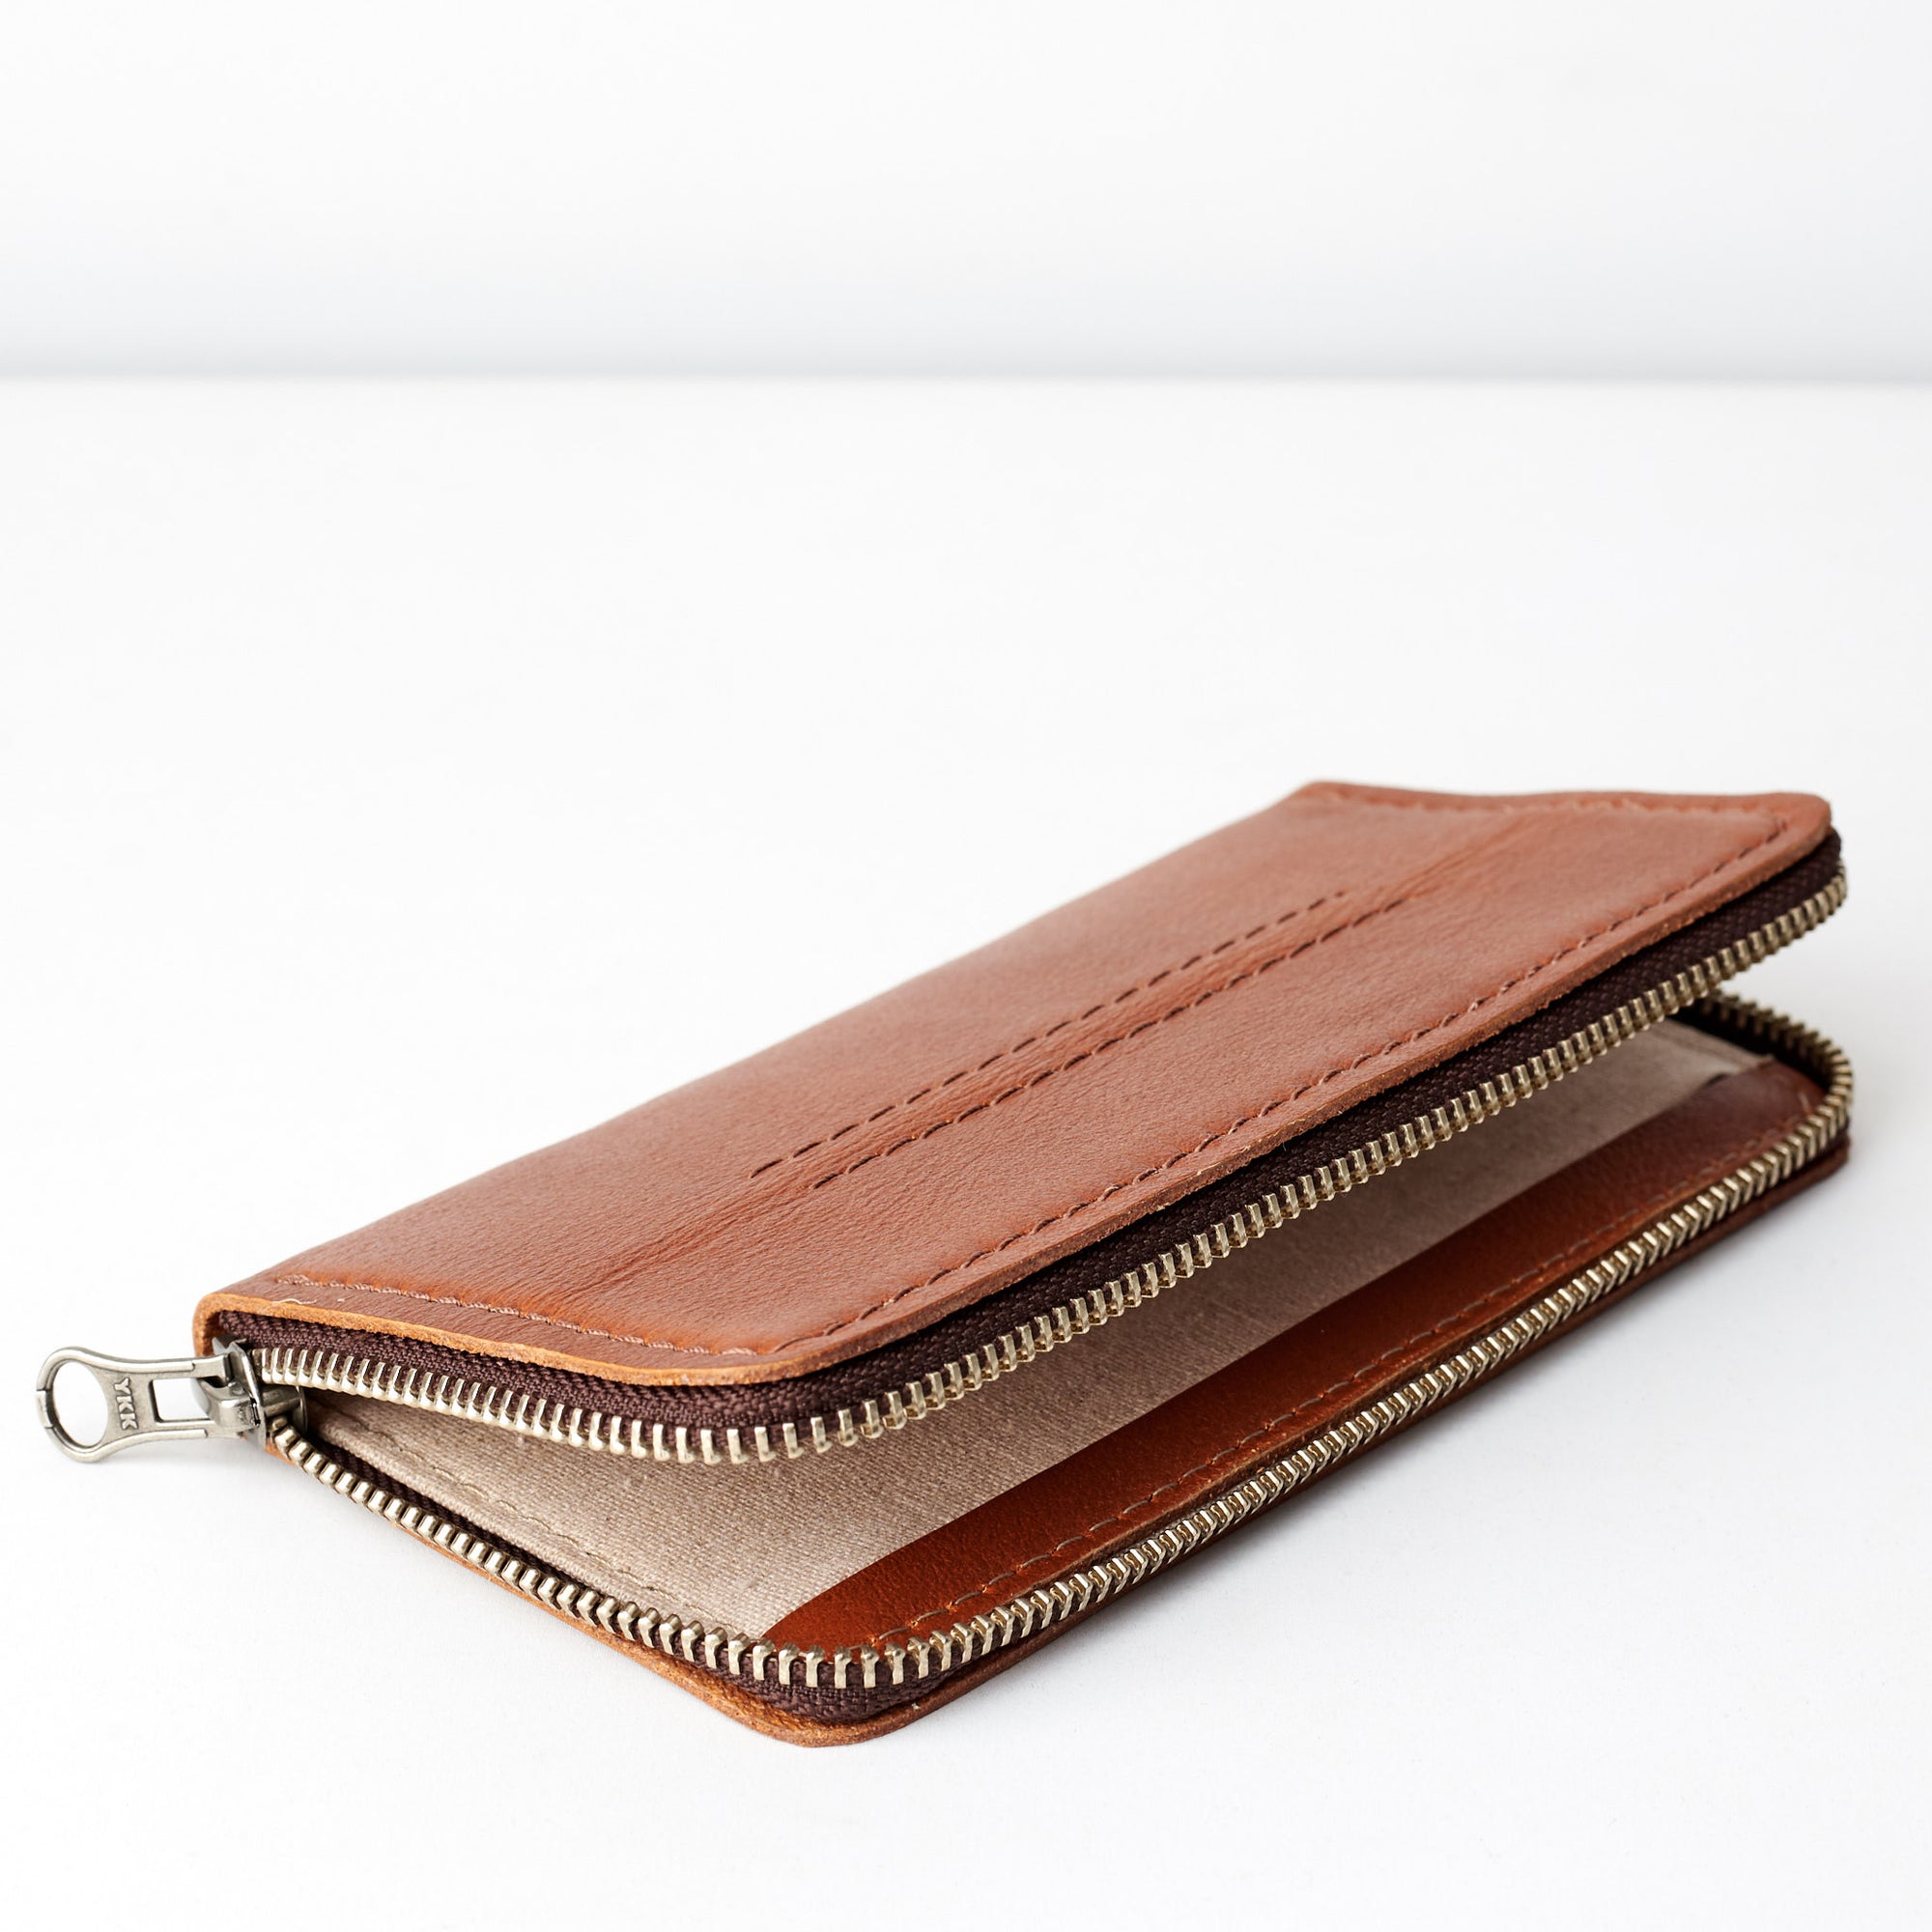 Linen interior. Tan handcrafted leather stand case for the Samsung Galaxy S8 and S8 Plus, Samsung Galaxy S9 and S9 Plus, Samsung Galaxy S10 and S10 Plus .  Samsung sleeve wallet with card holder. Crafted by Capra Leather.